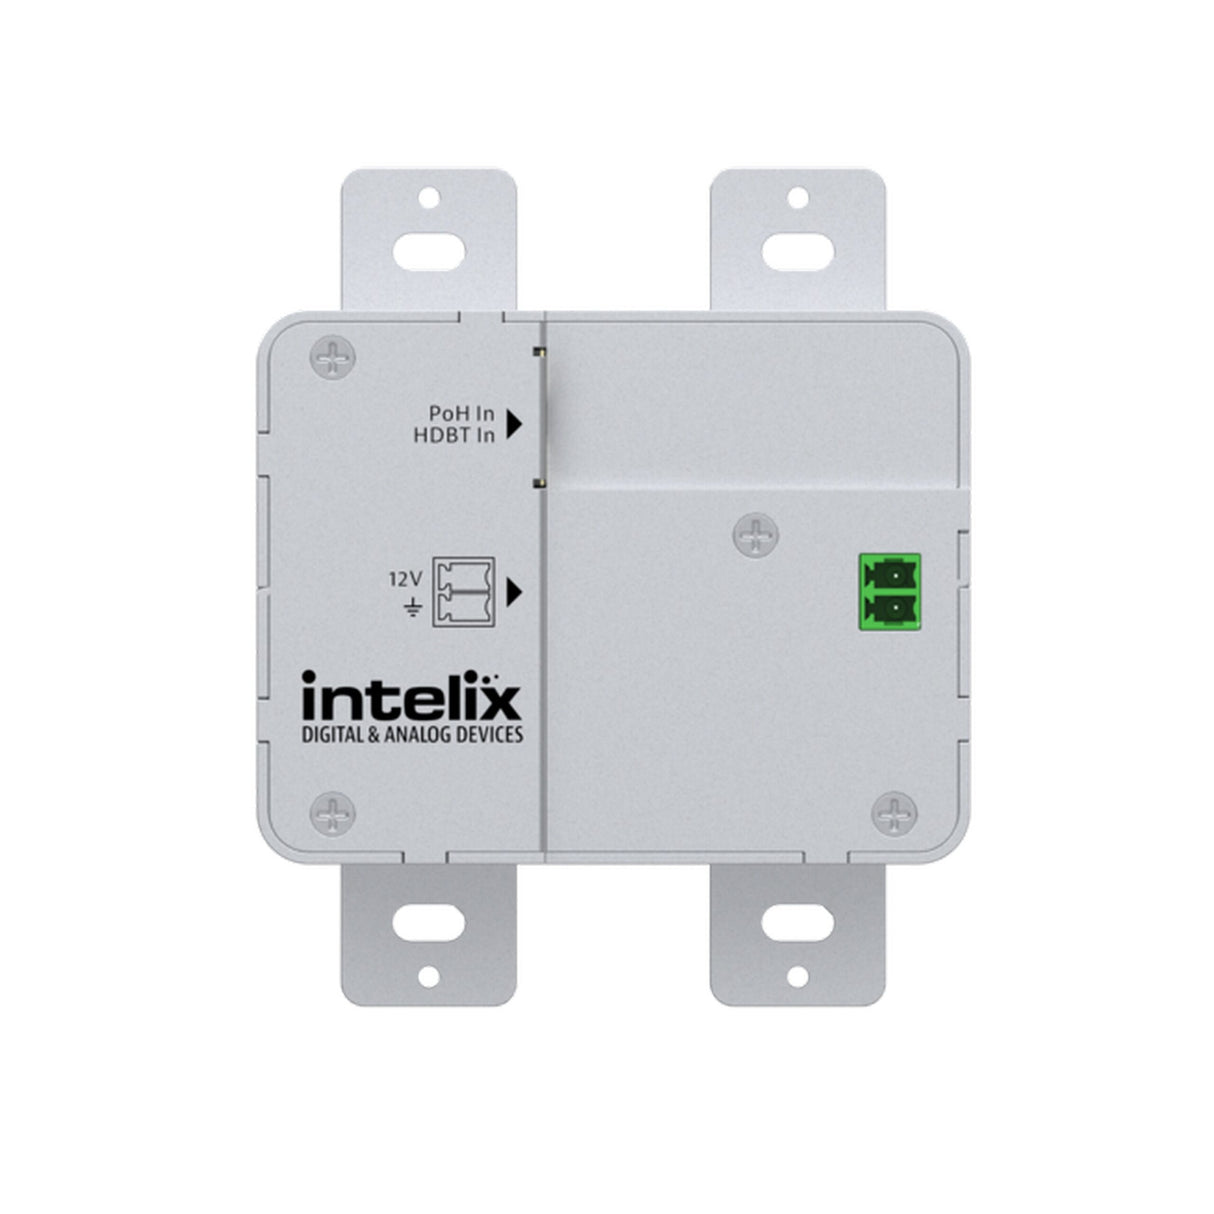 Intelix INT-HDX100-RXWP HDMI HDBaseT Recessed Face Wall Plate Receiver